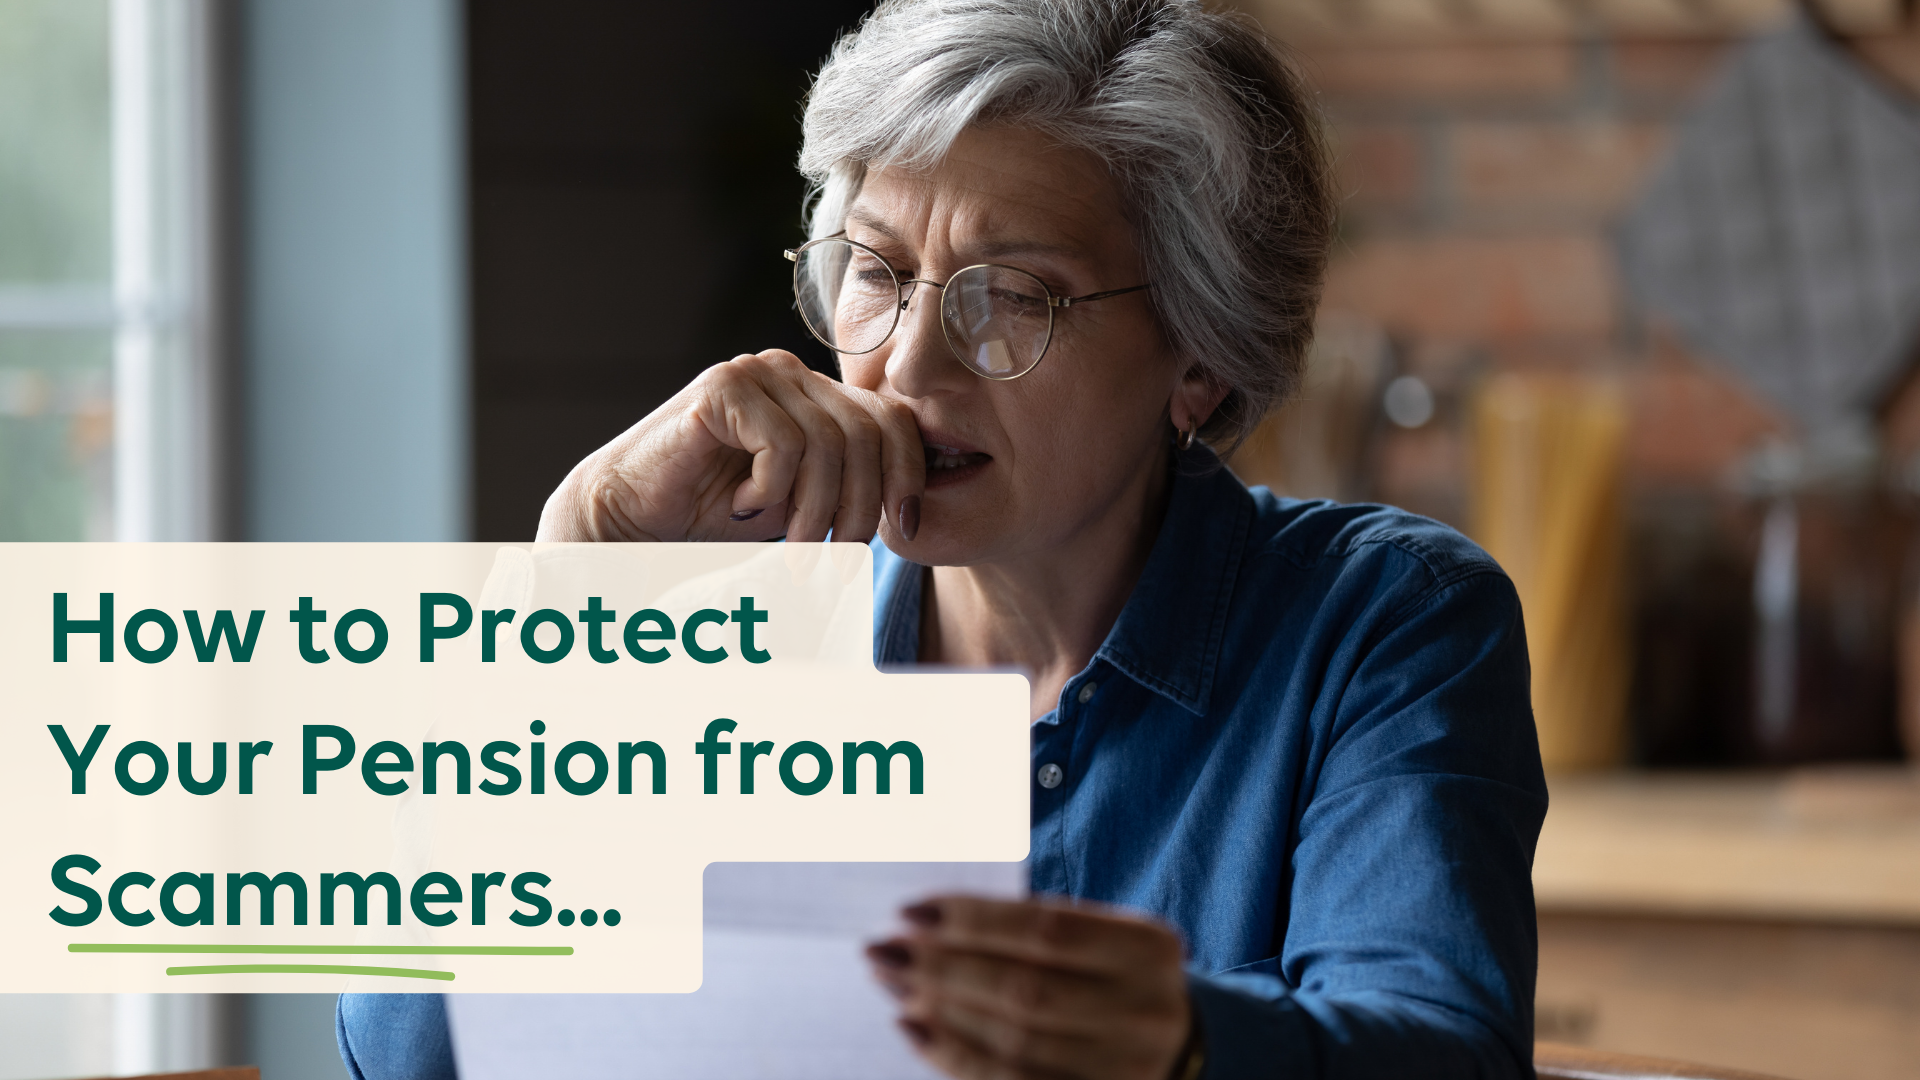 Protect Your Pension From Scammers